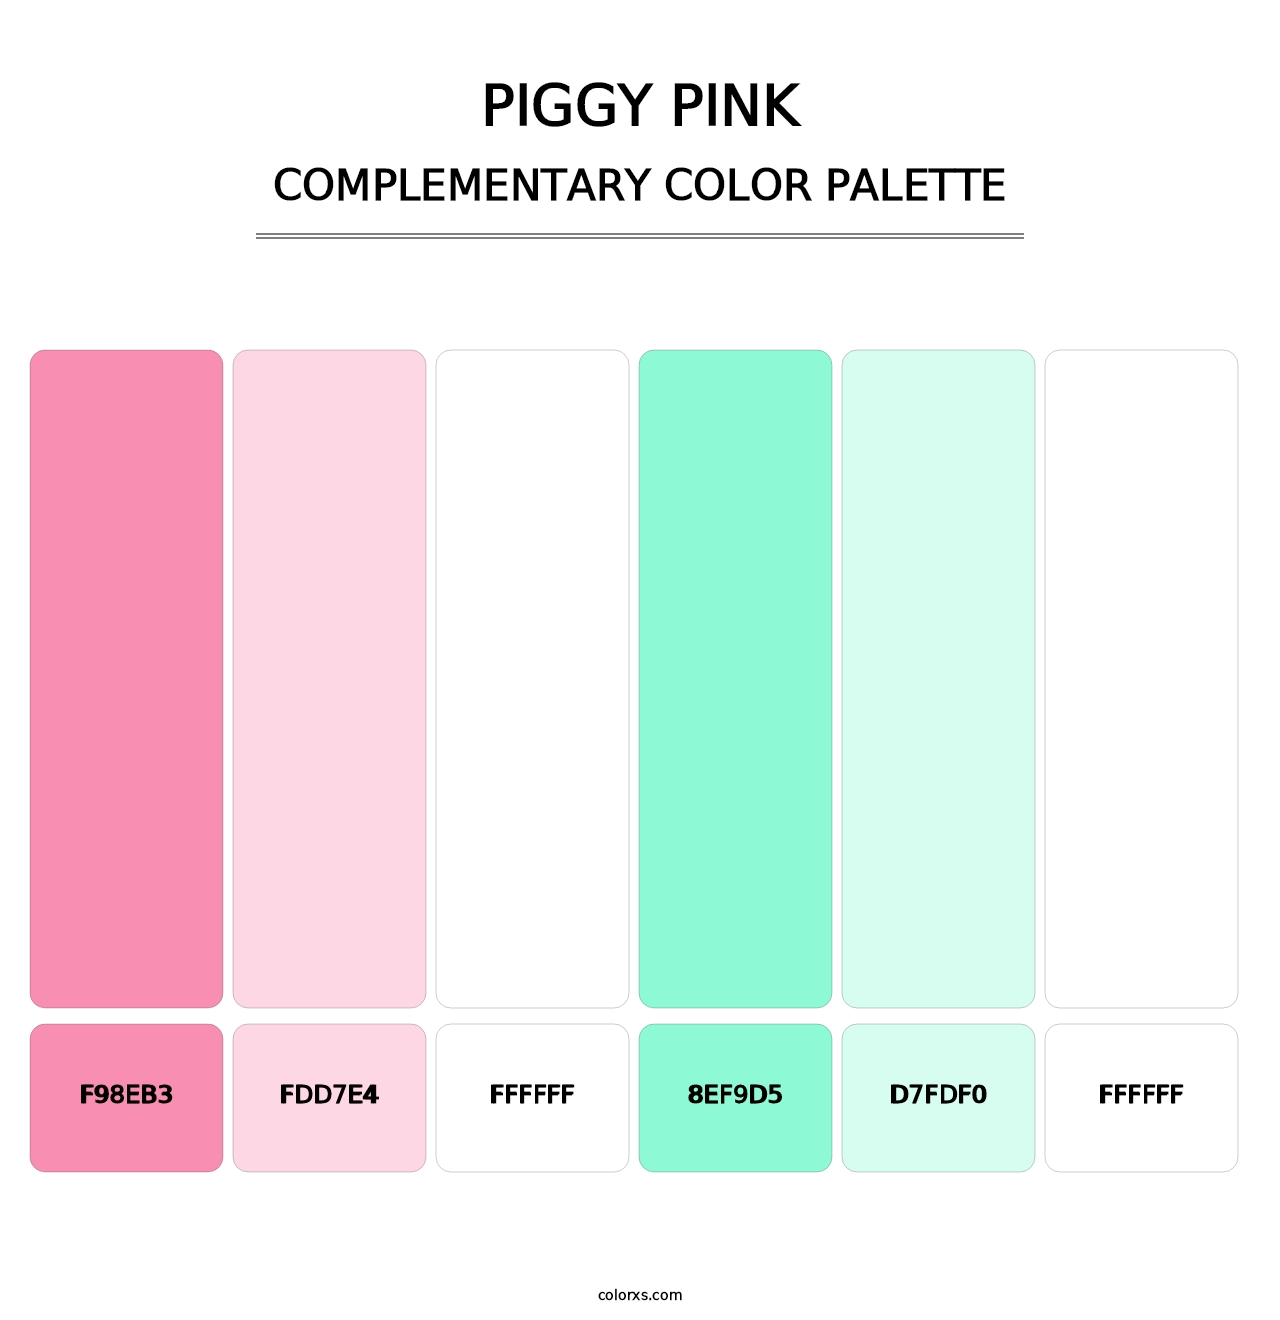 Piggy Pink - Complementary Color Palette